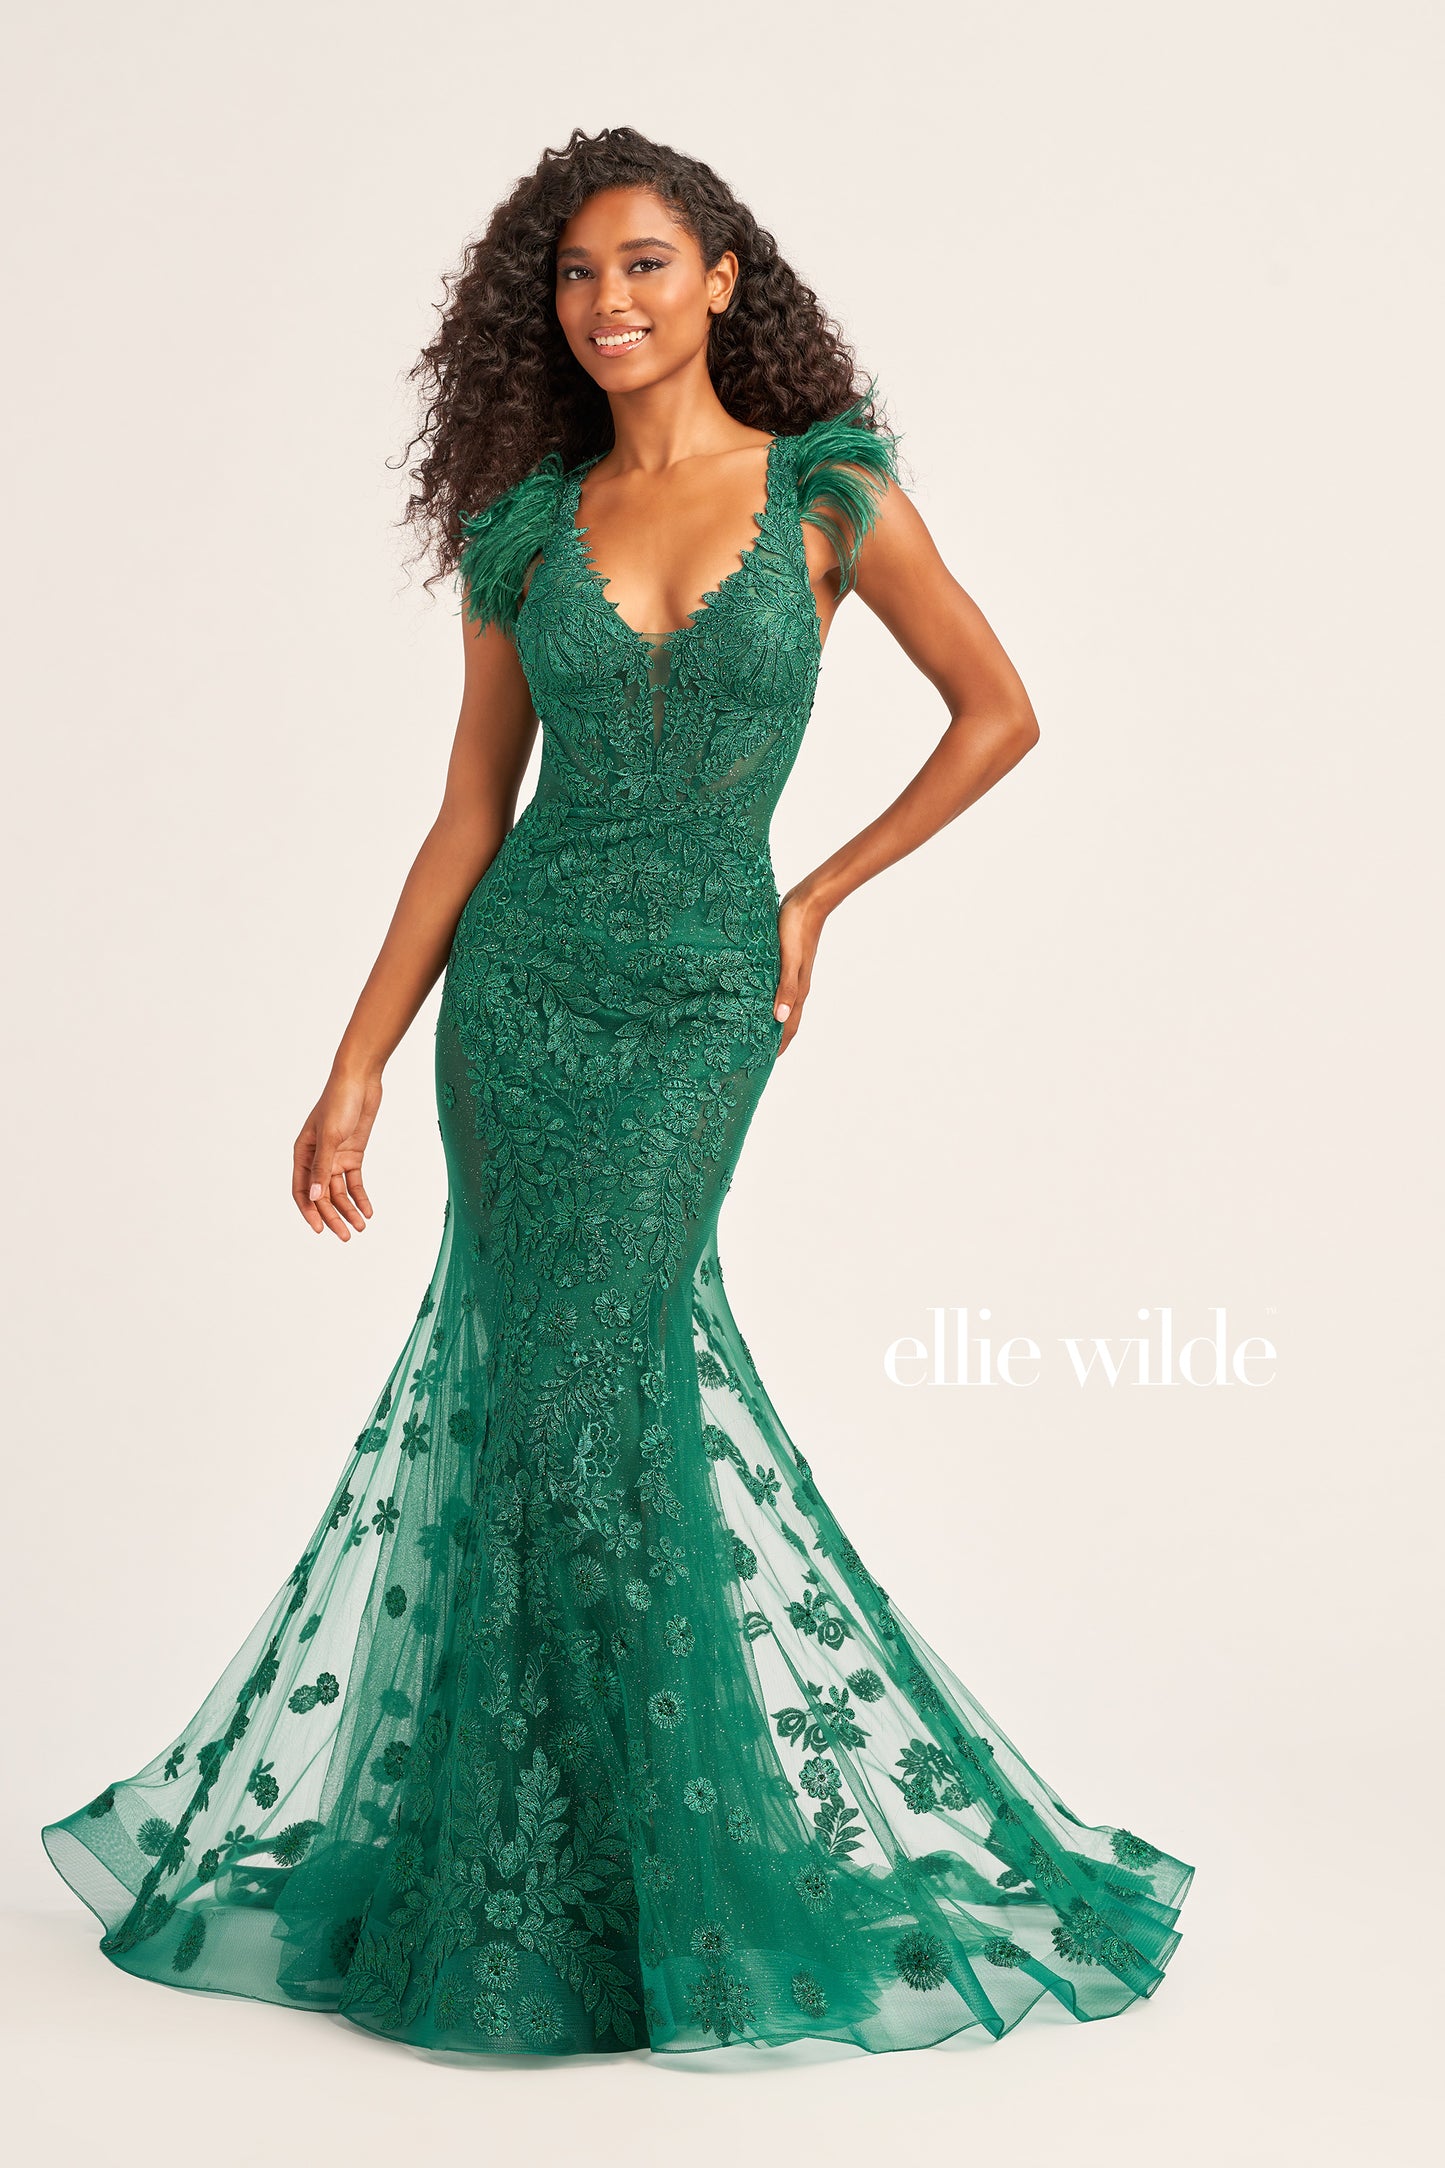 Look dazzling in this Ellie Wilde EW35009 evening gown, crafted with glitter tulle, lace appliques, and stone accents for an eye-catching look. A plunging V-neck, long trumpet silhouette, and detachable feather cap sleeves add to the glamour. The natural waistline and side mesh inset complete the look.  COLOR: BLACK, EMERALD, SAGE, STRAWBERRY, BLUEBELL SIZE: 00 - 20